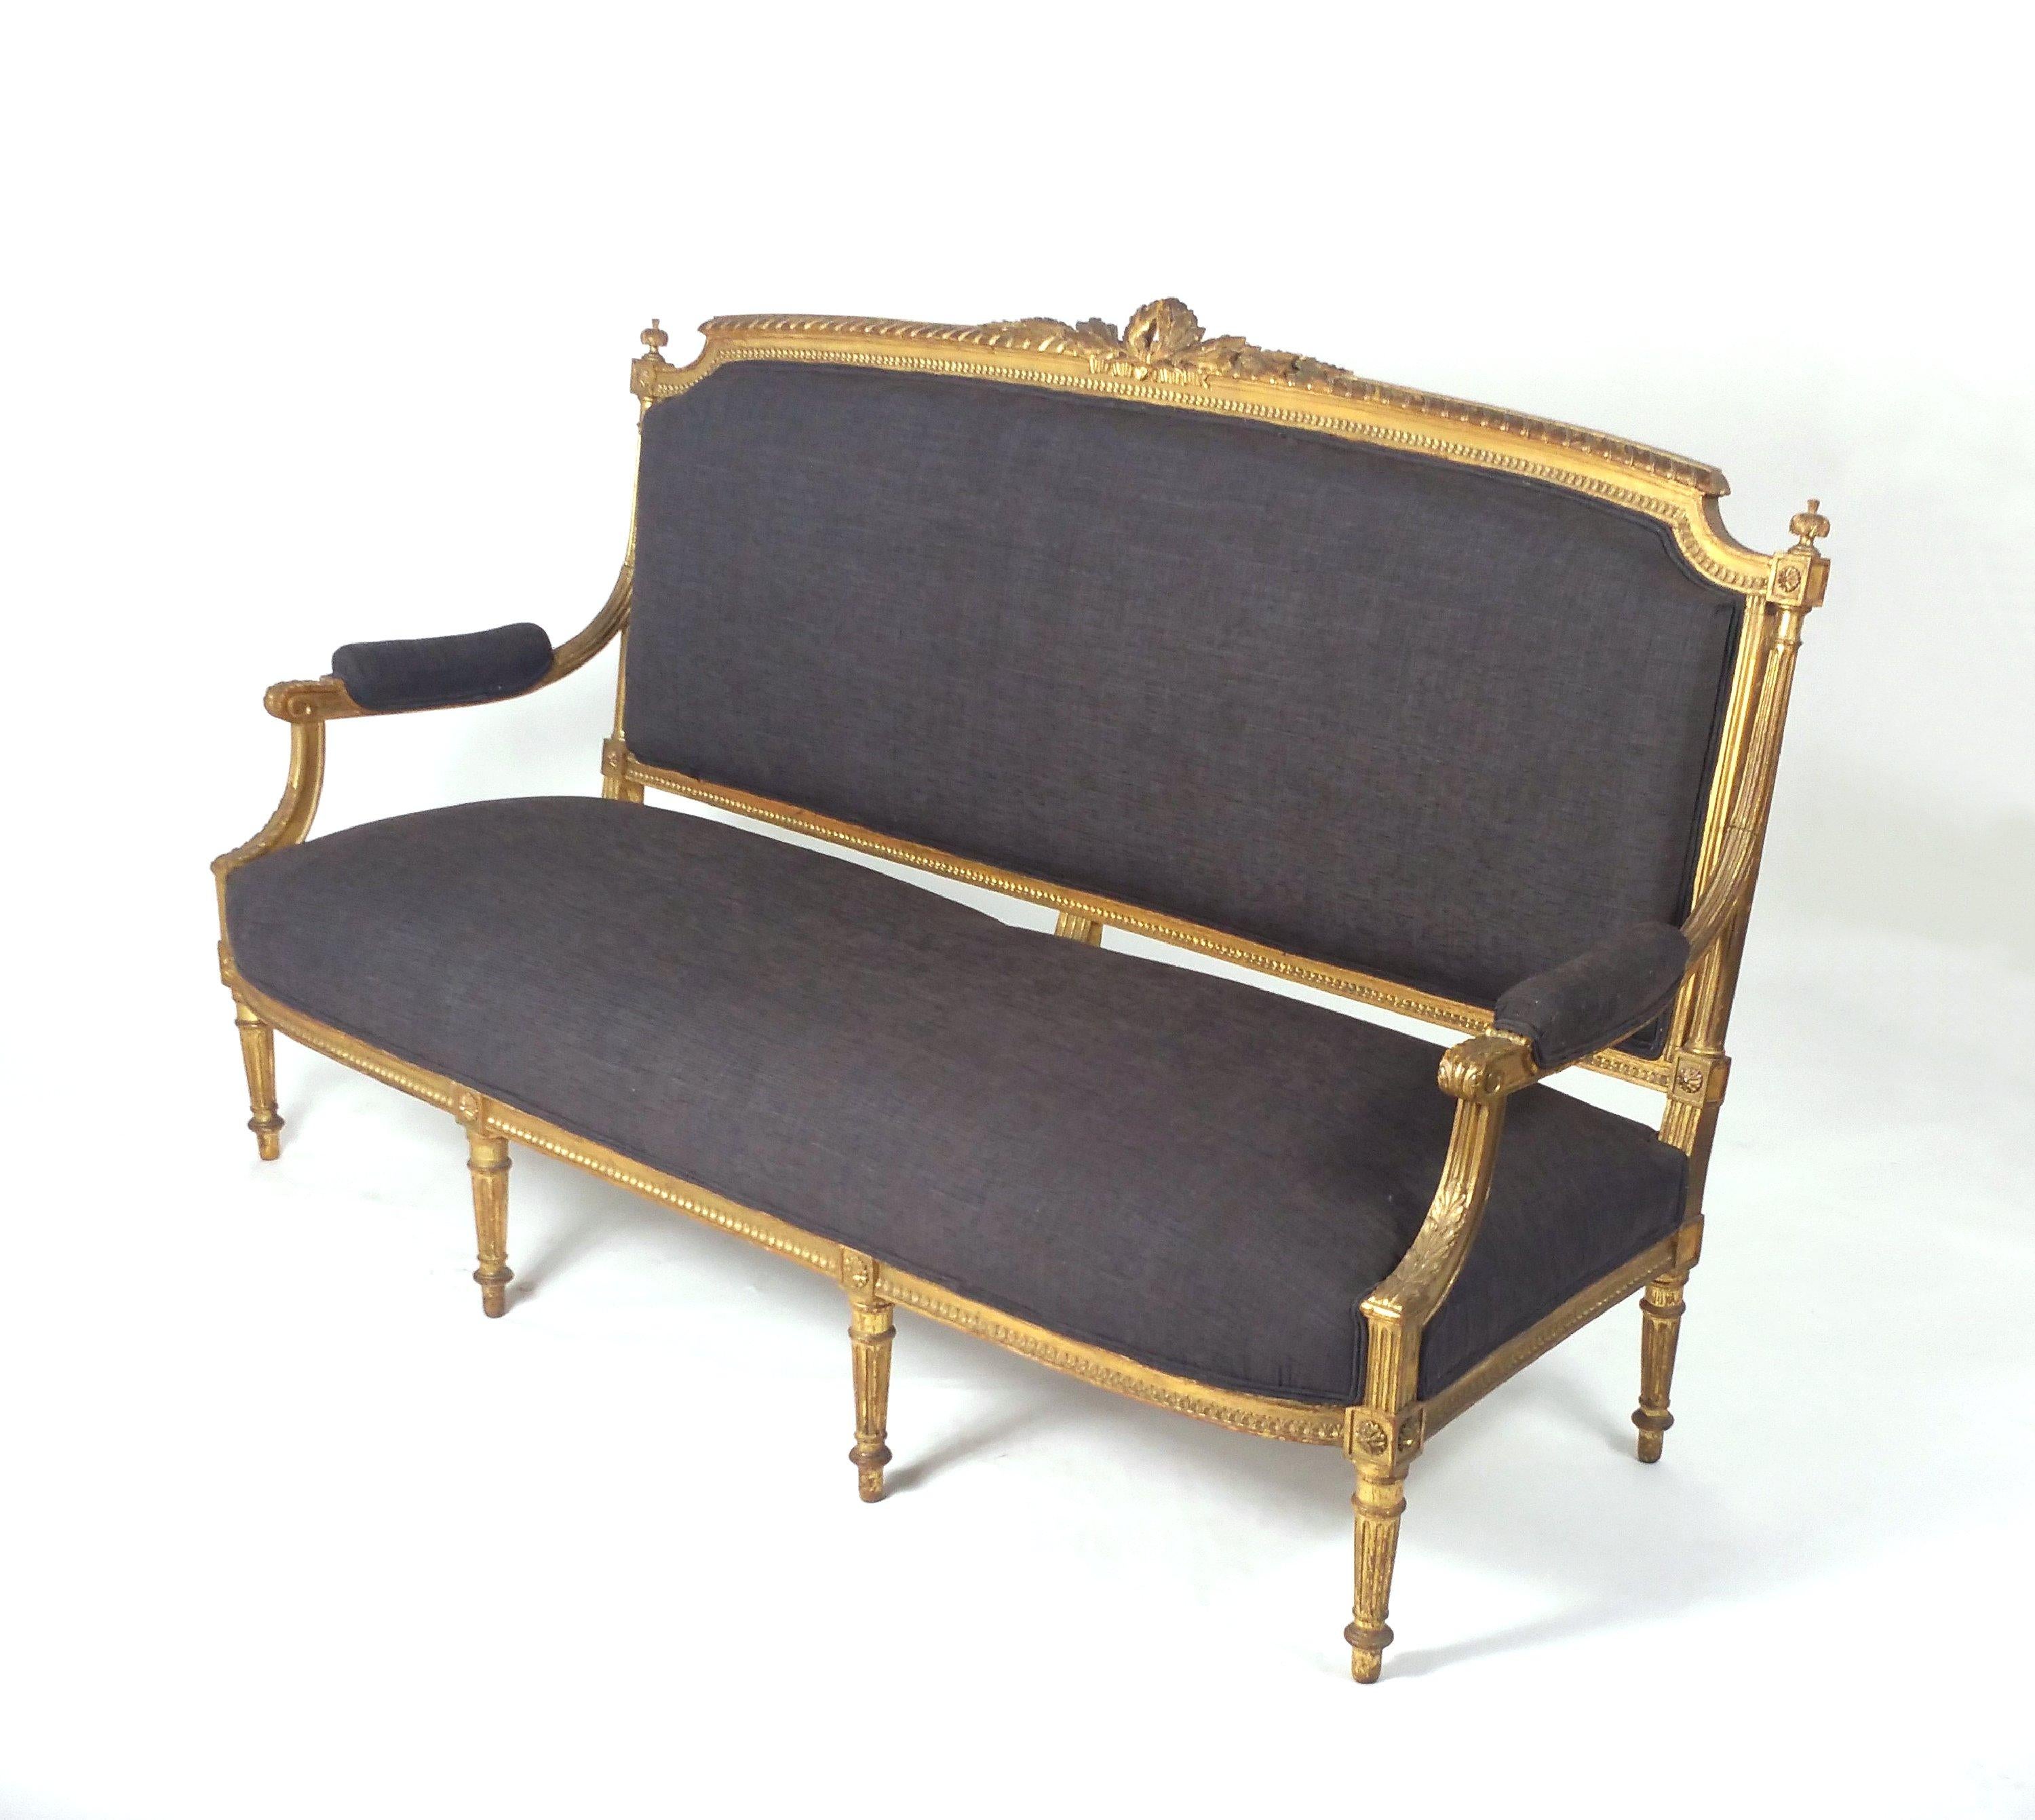 This elegant and very attractive mid-19th century French carved gilt wood sofa features ornate detailing and carving throughout, with acanthus leaves, ribbons, palmettes and scroll work. The sofa is upholstered in textured dark charcoal grey